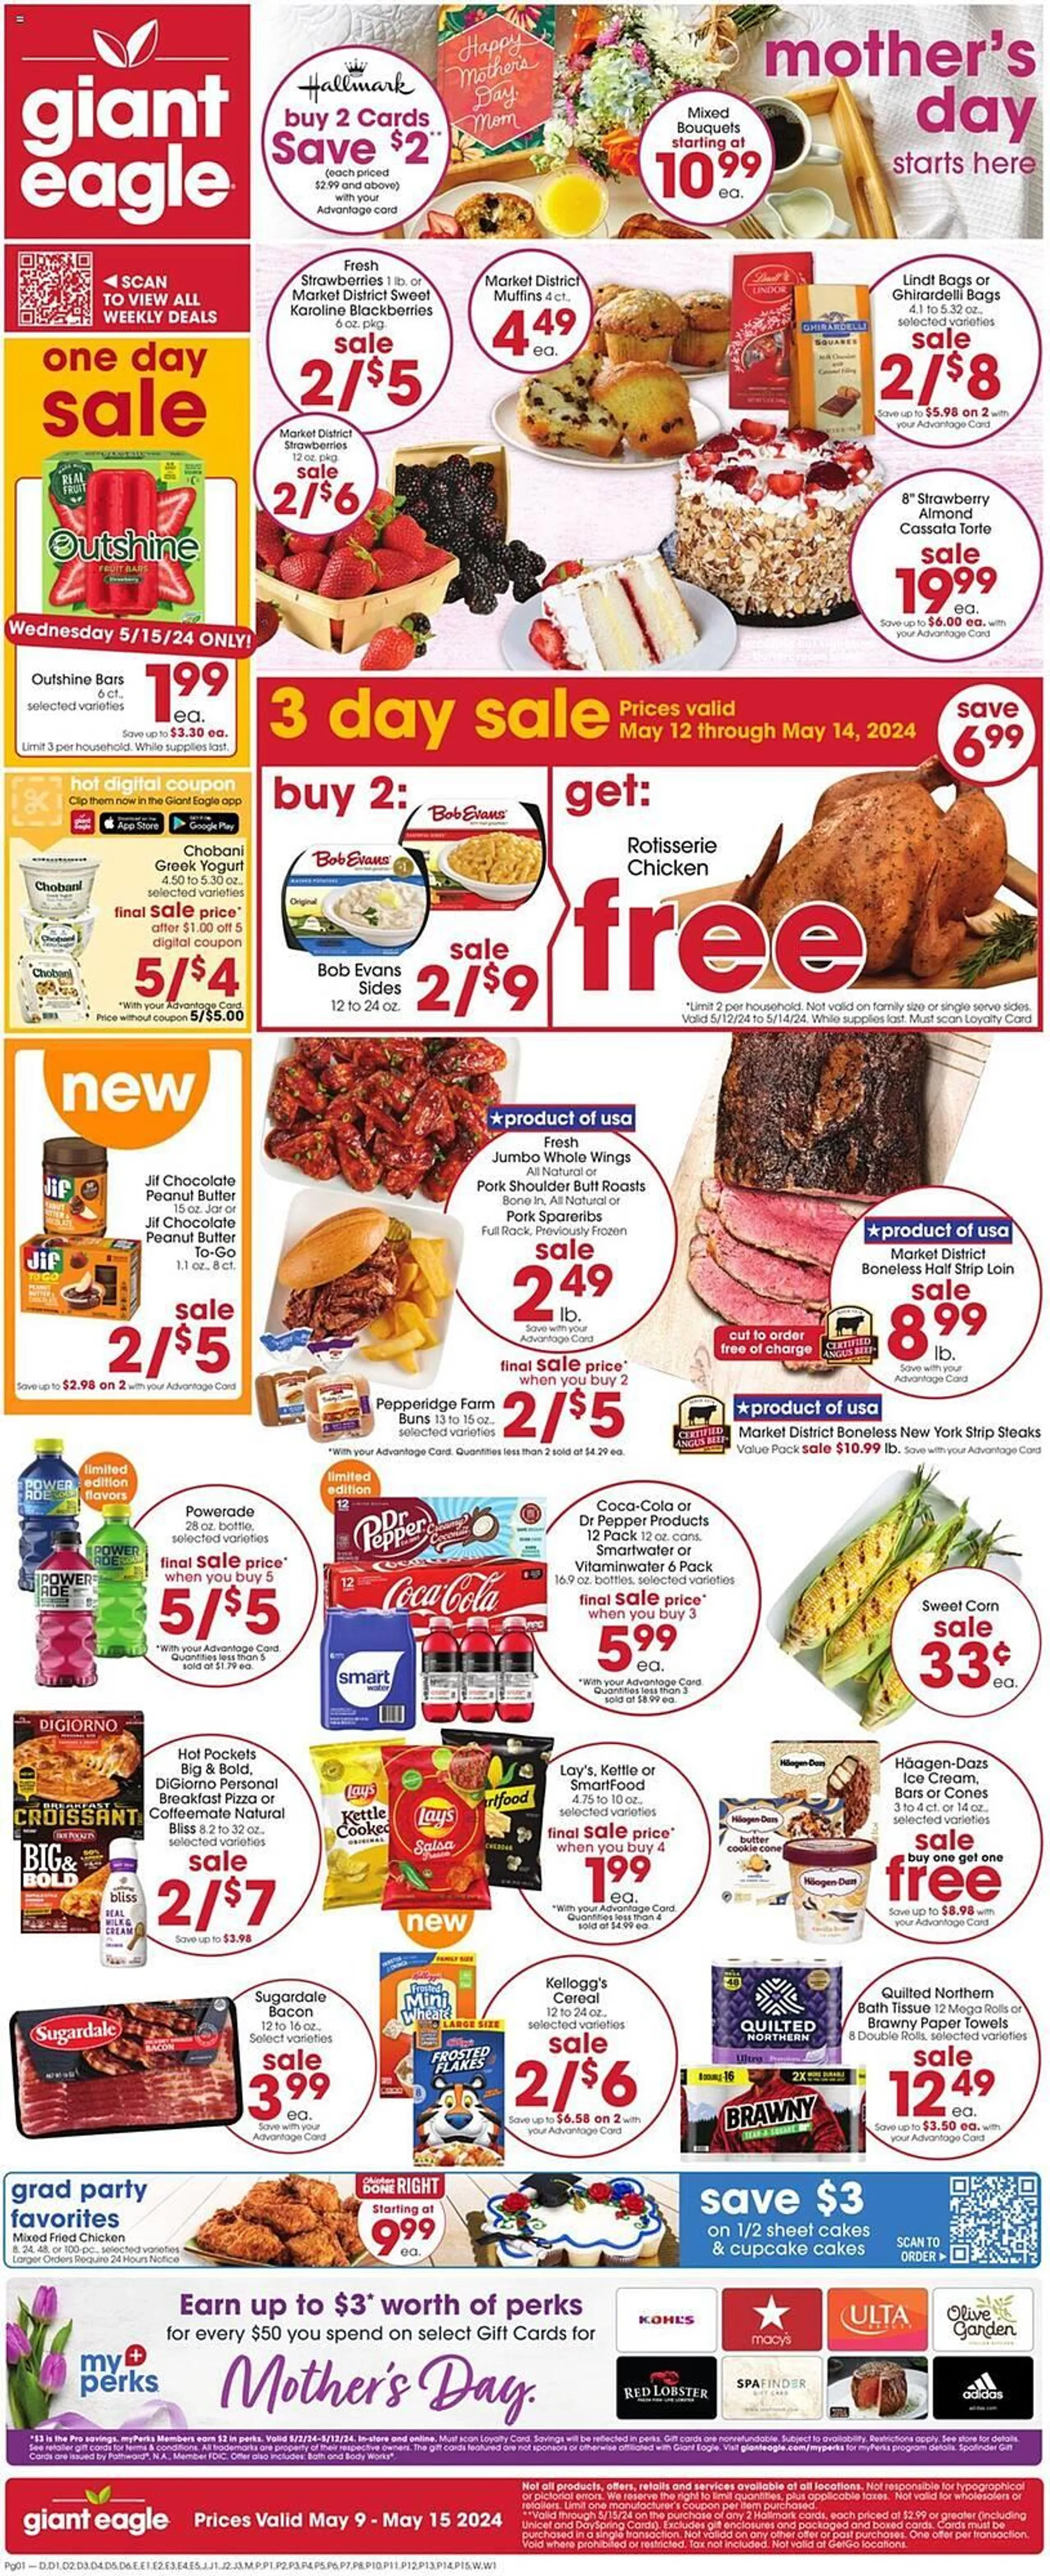 Giant Eagle Weekly Ad - 1